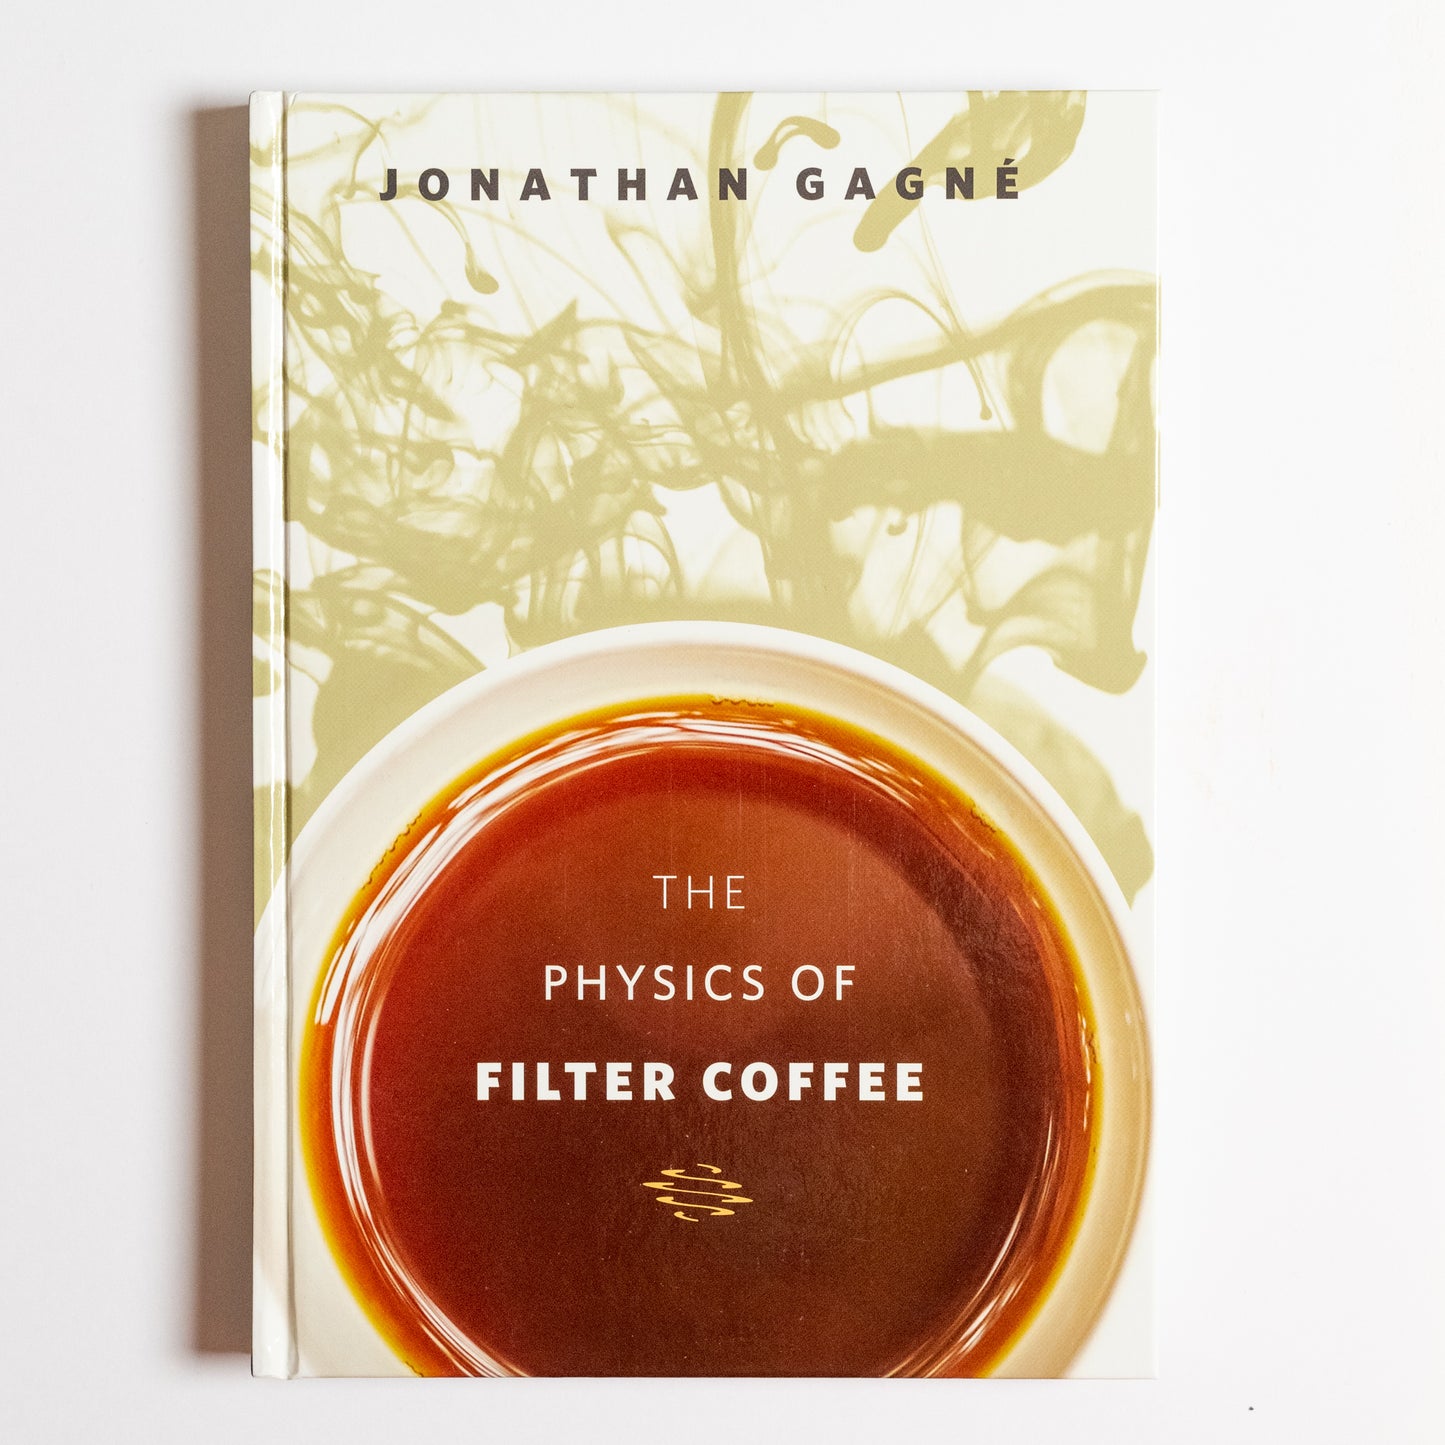 The Physics of Filter Coffee by Jonathan Gagne